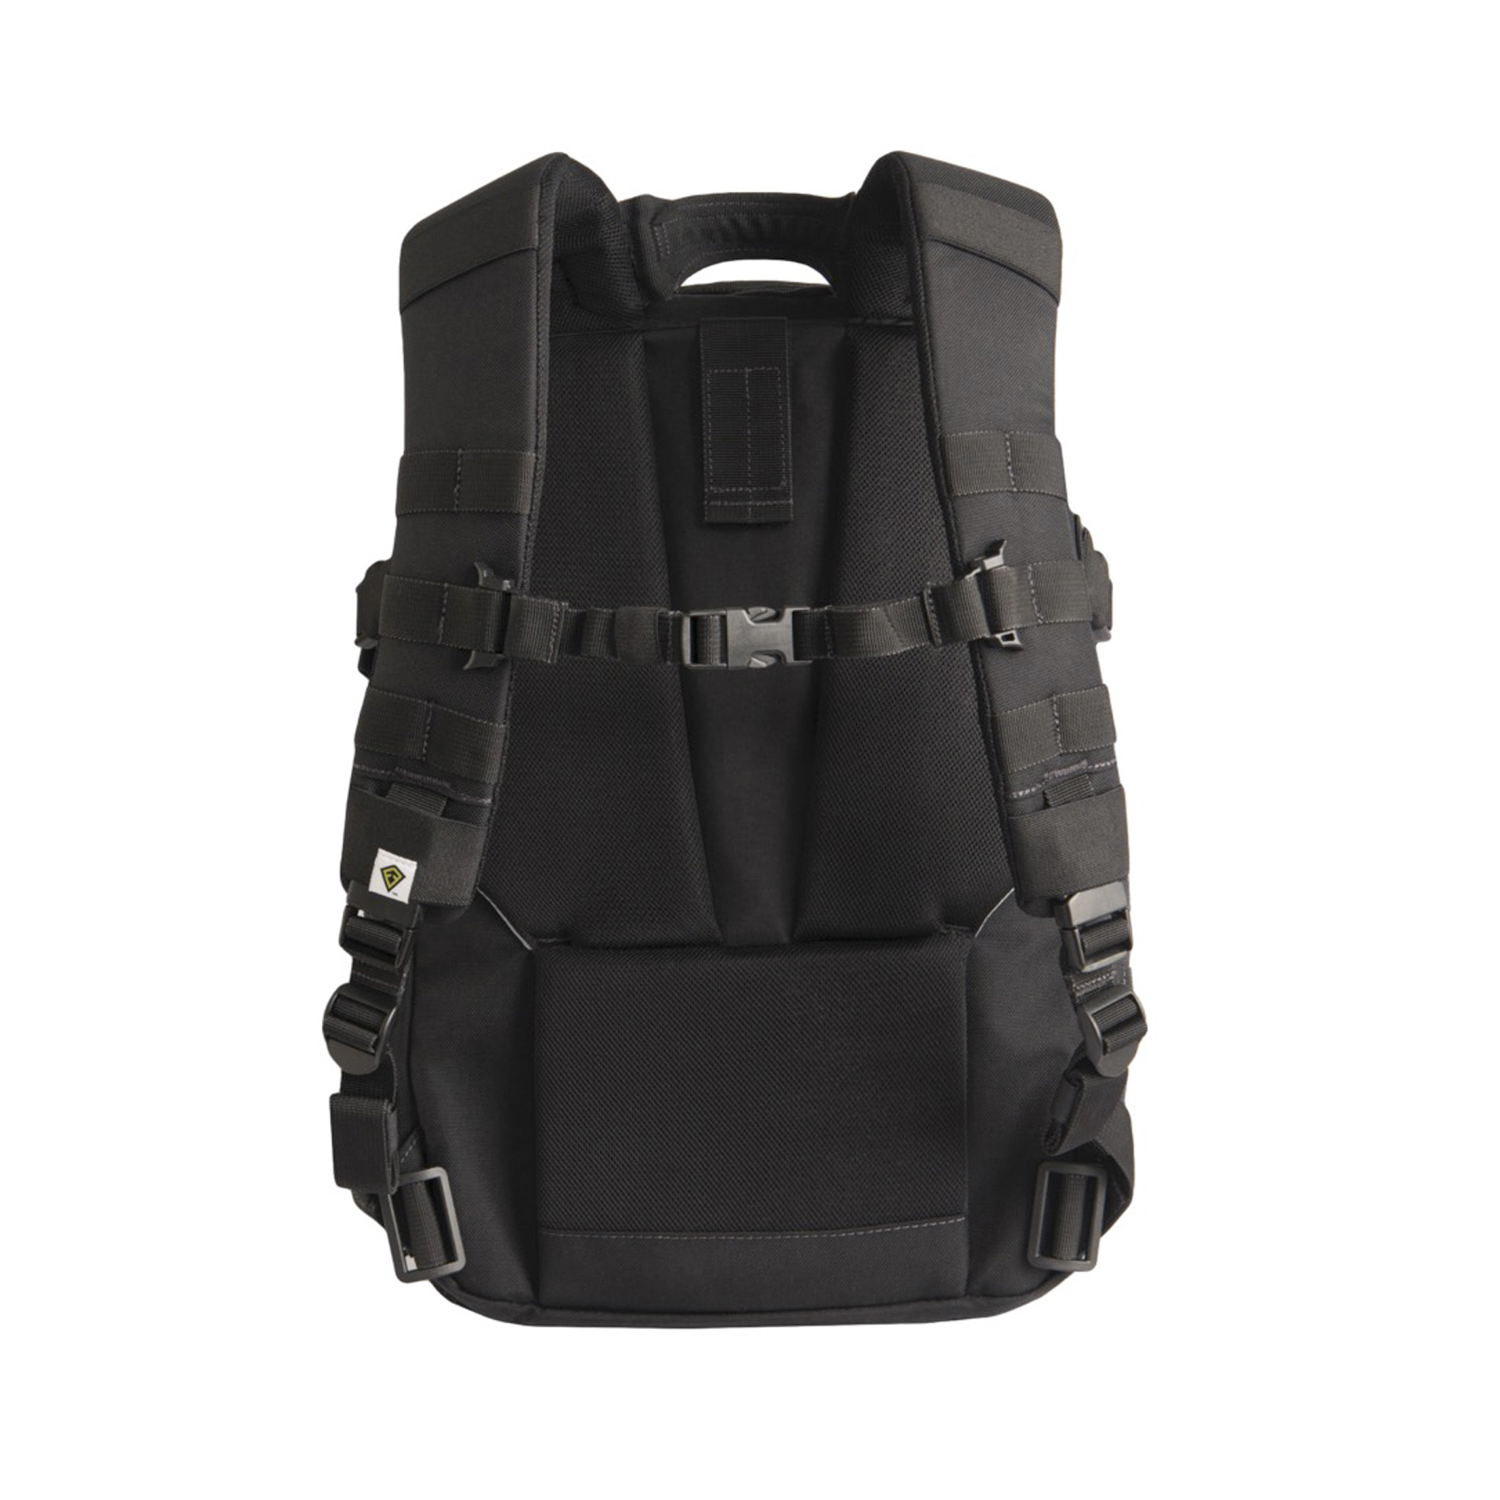 FIRST TACTICAL SPECIALIST 1-DAY BACKPACK - 36L